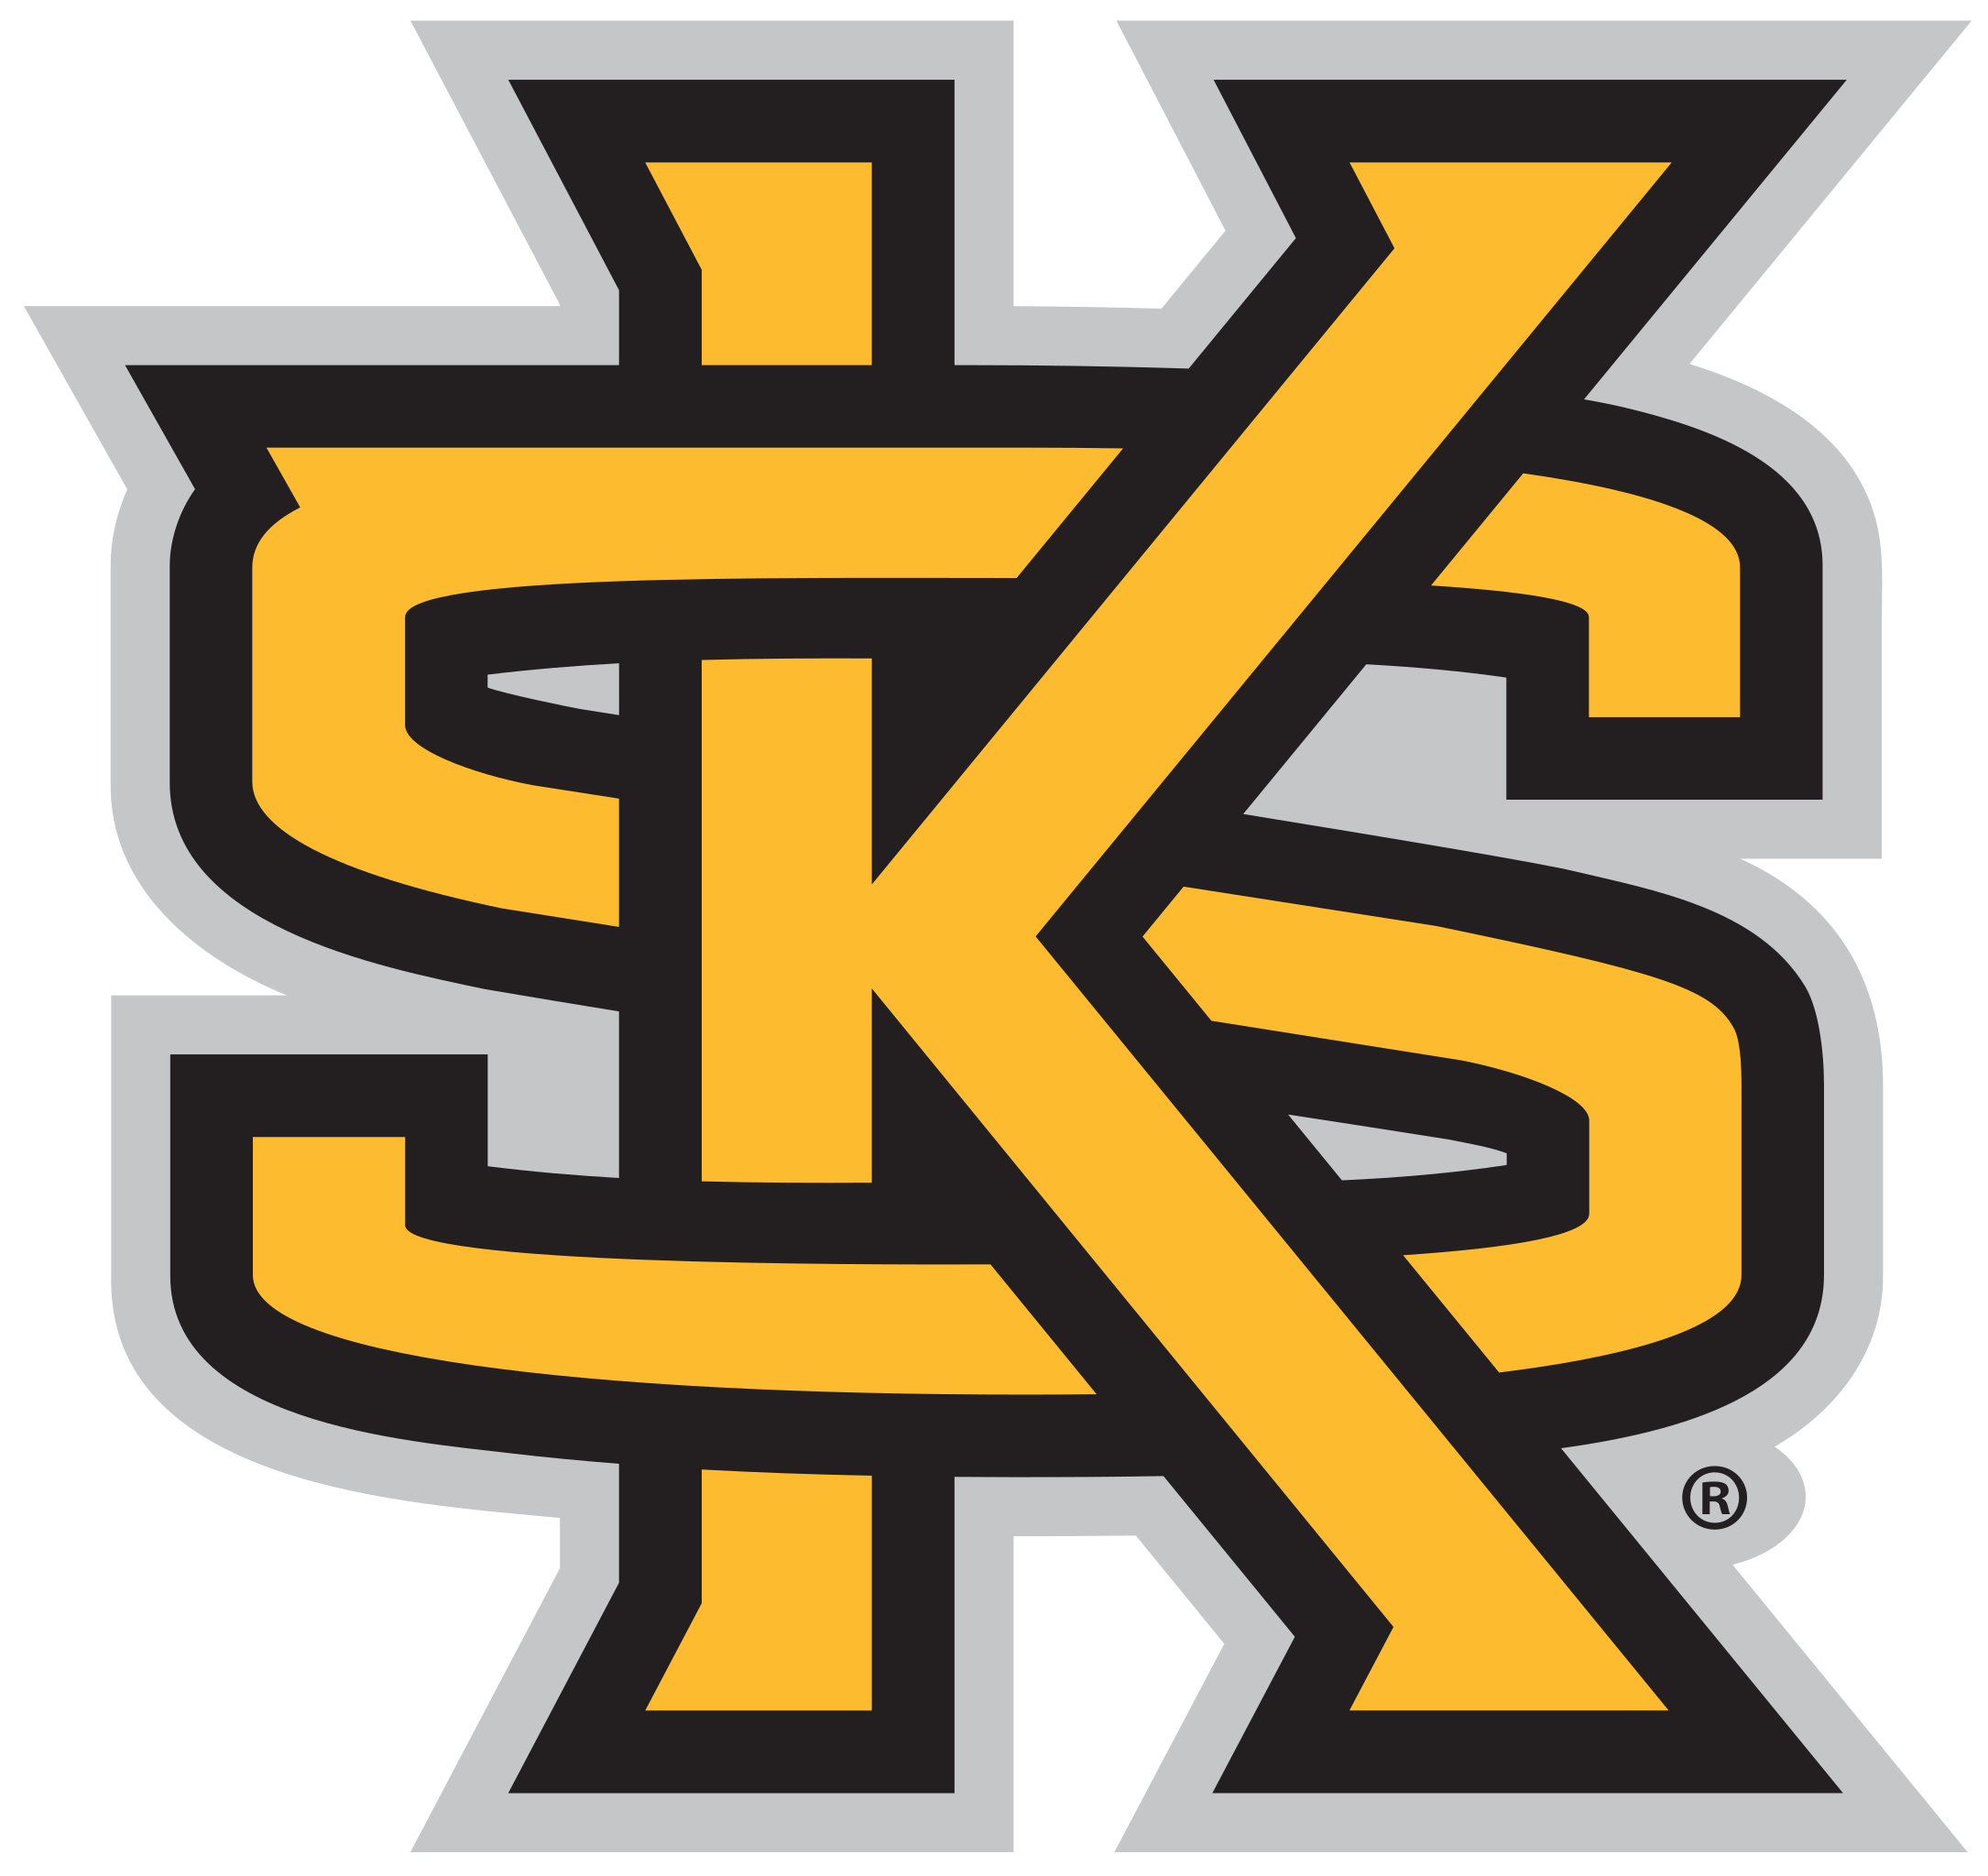 A black and yellow logo of the kansas state wildcats.